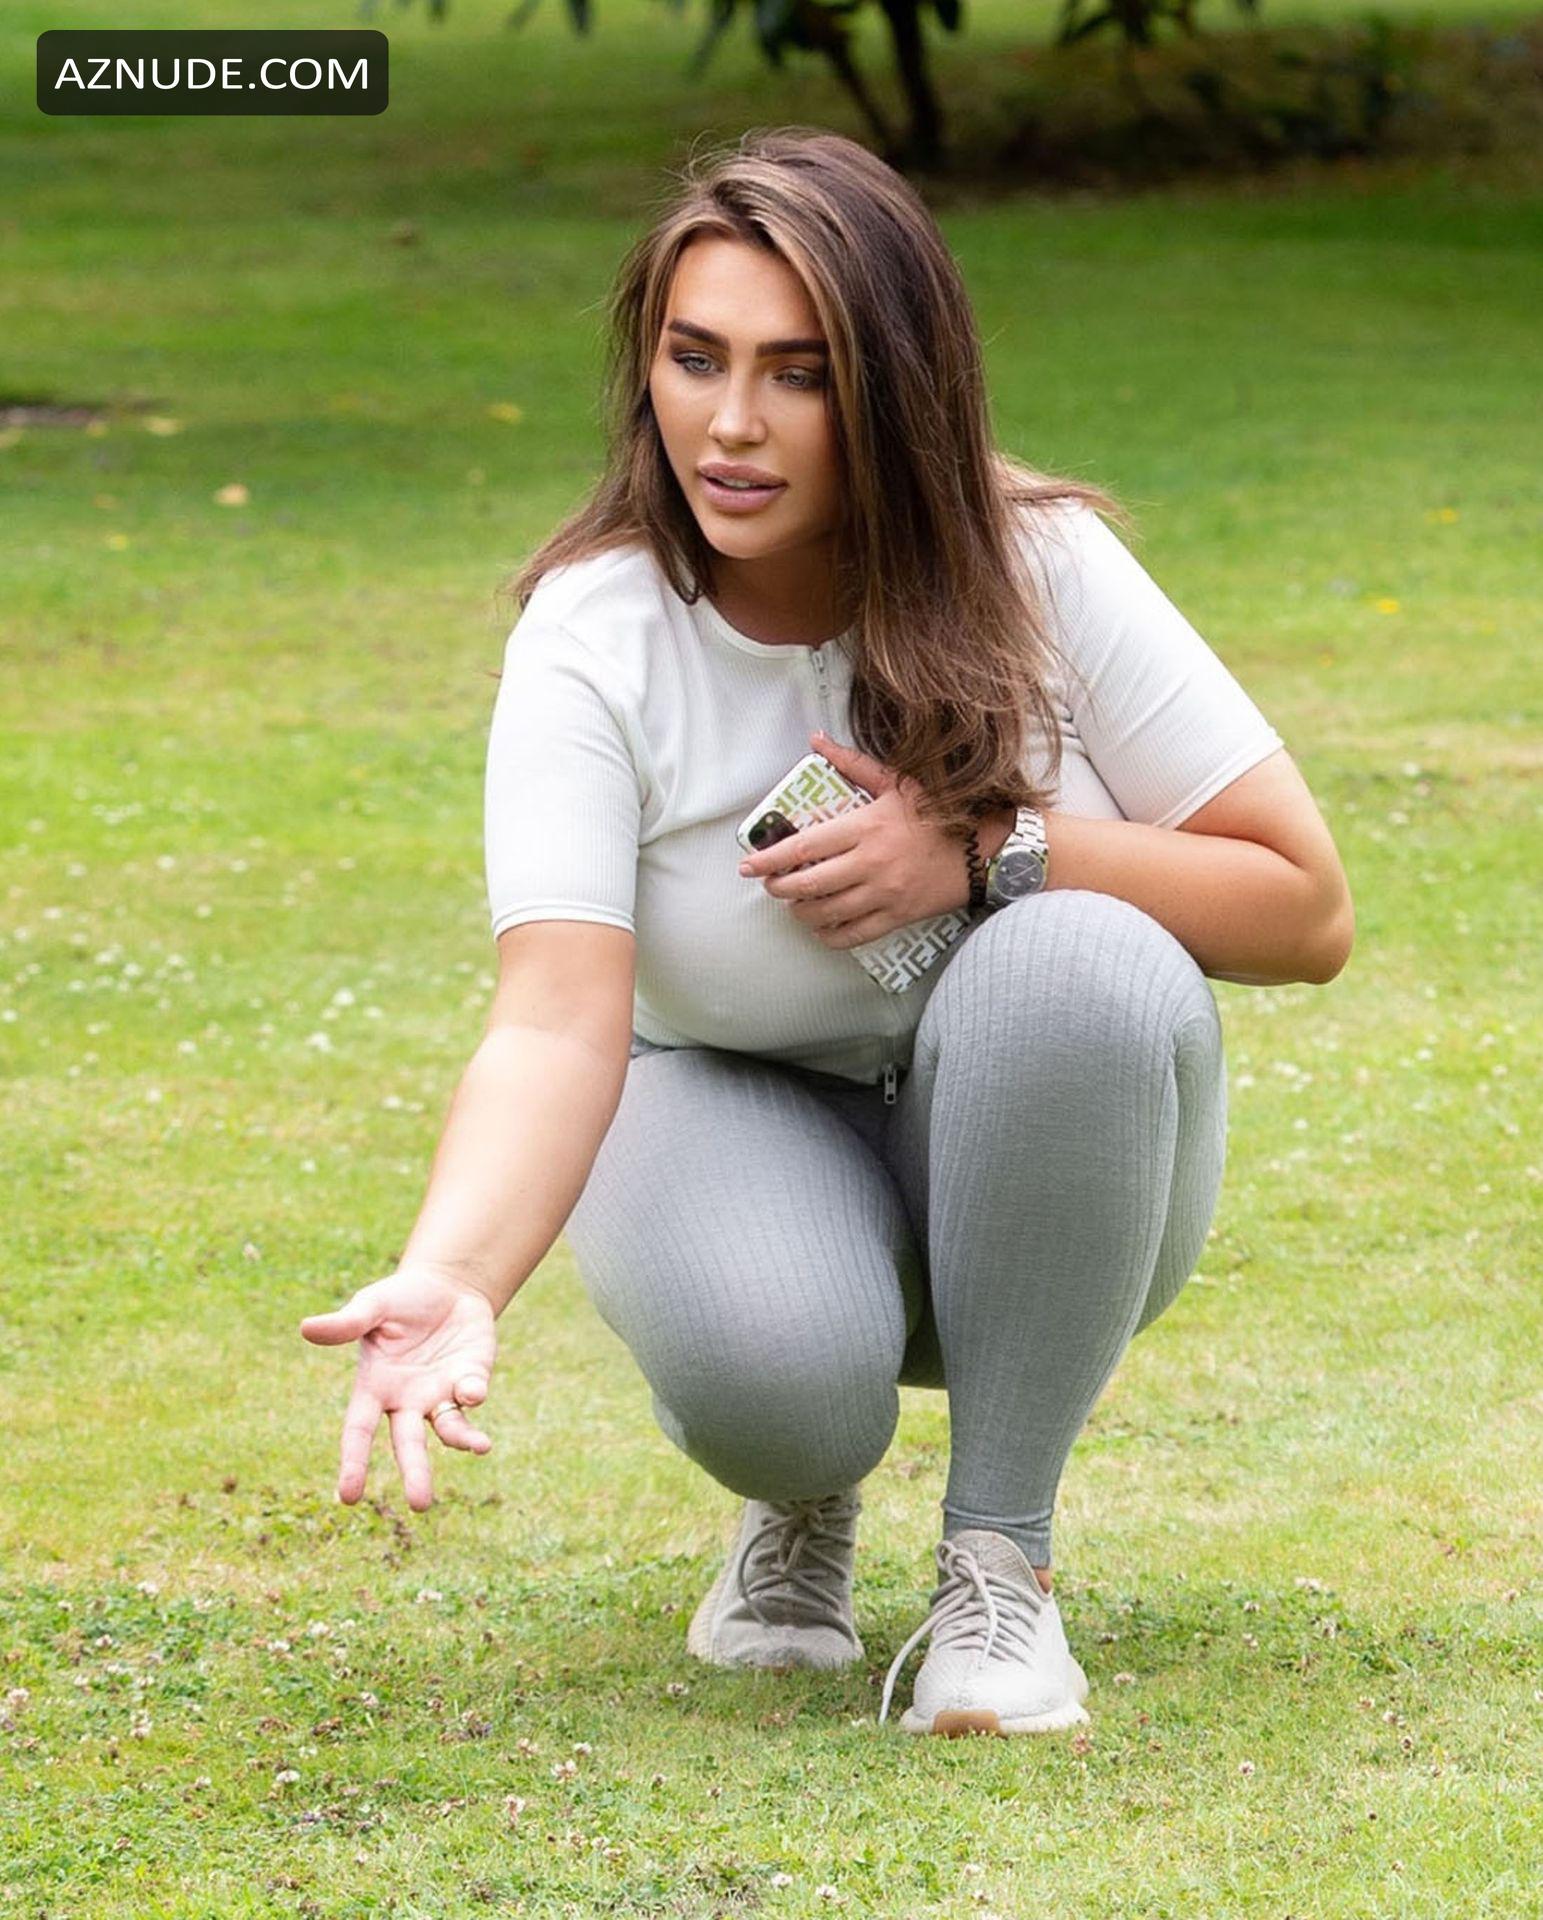 Lauren Goodger Seen Playing With A Dachshund In A Park In Essex Aznude